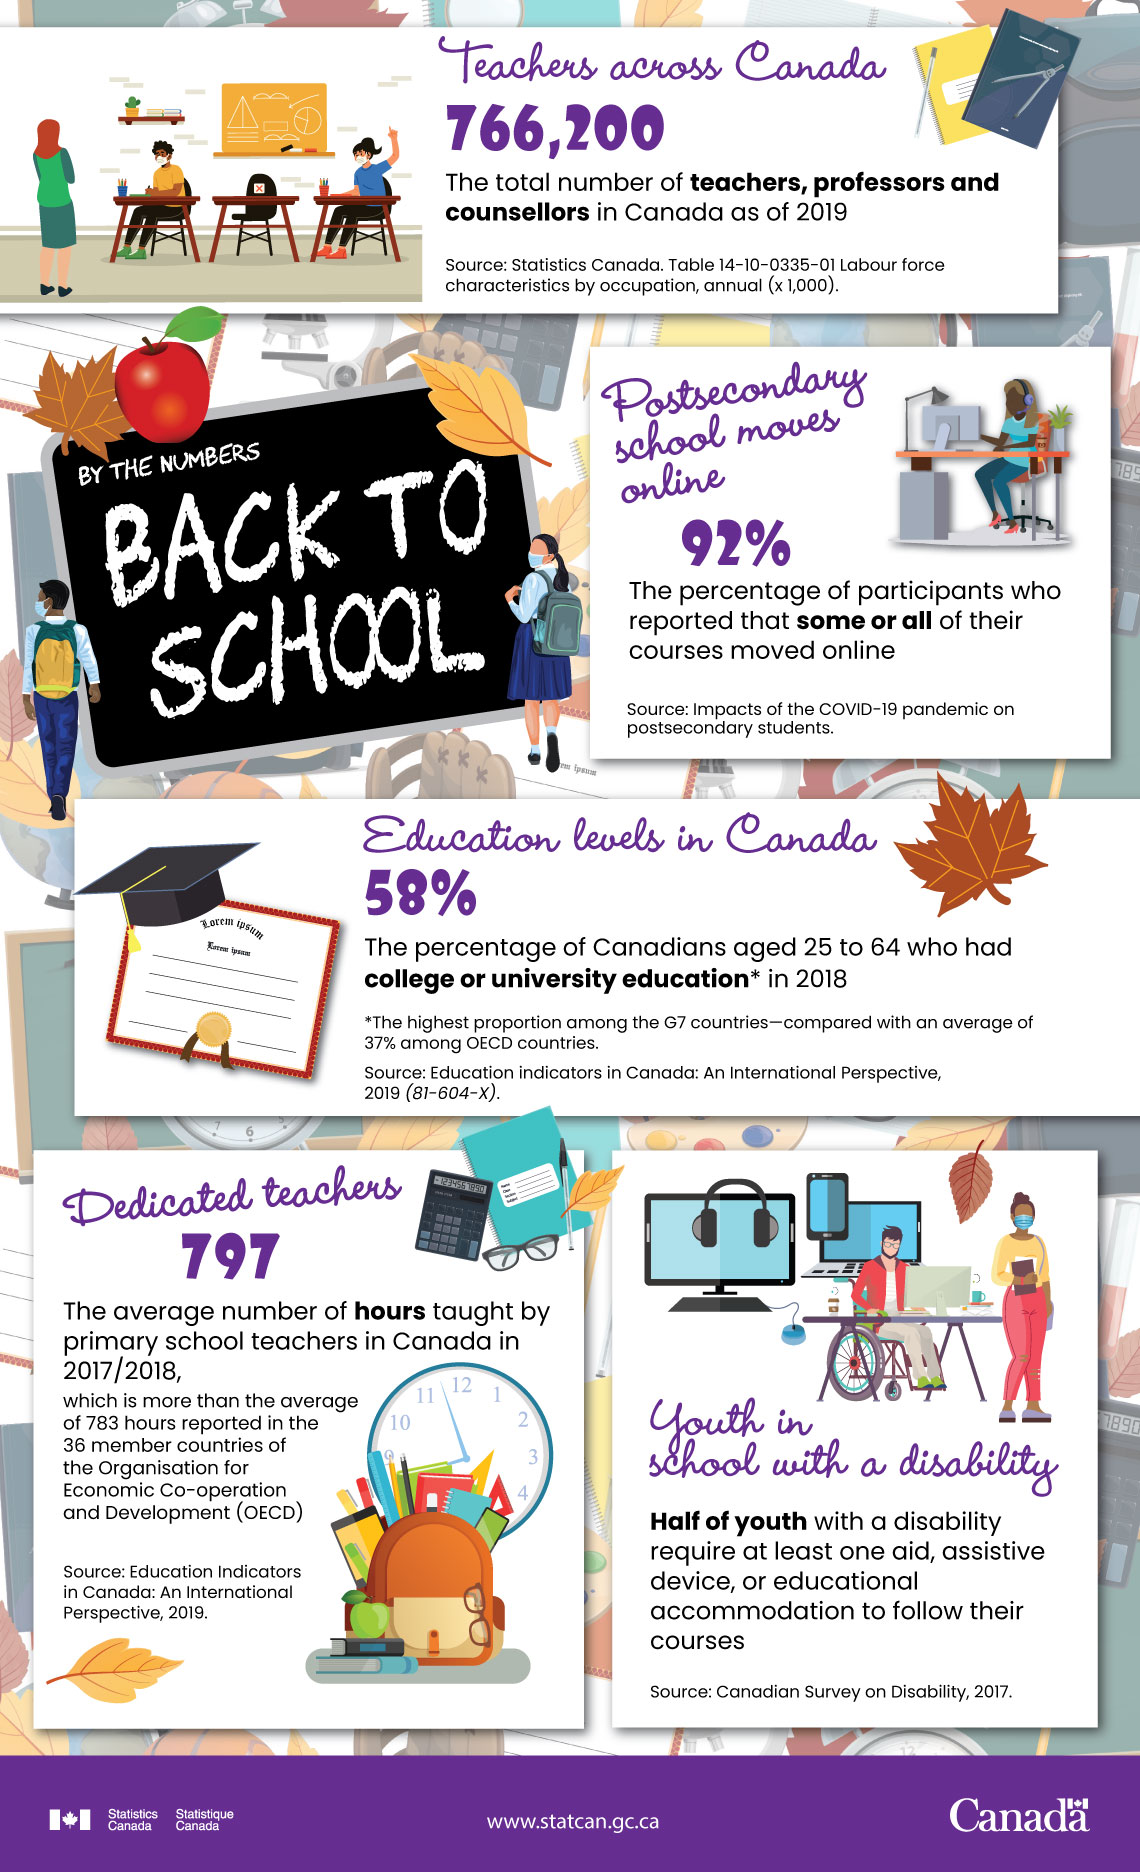 By the numbers - Back to school